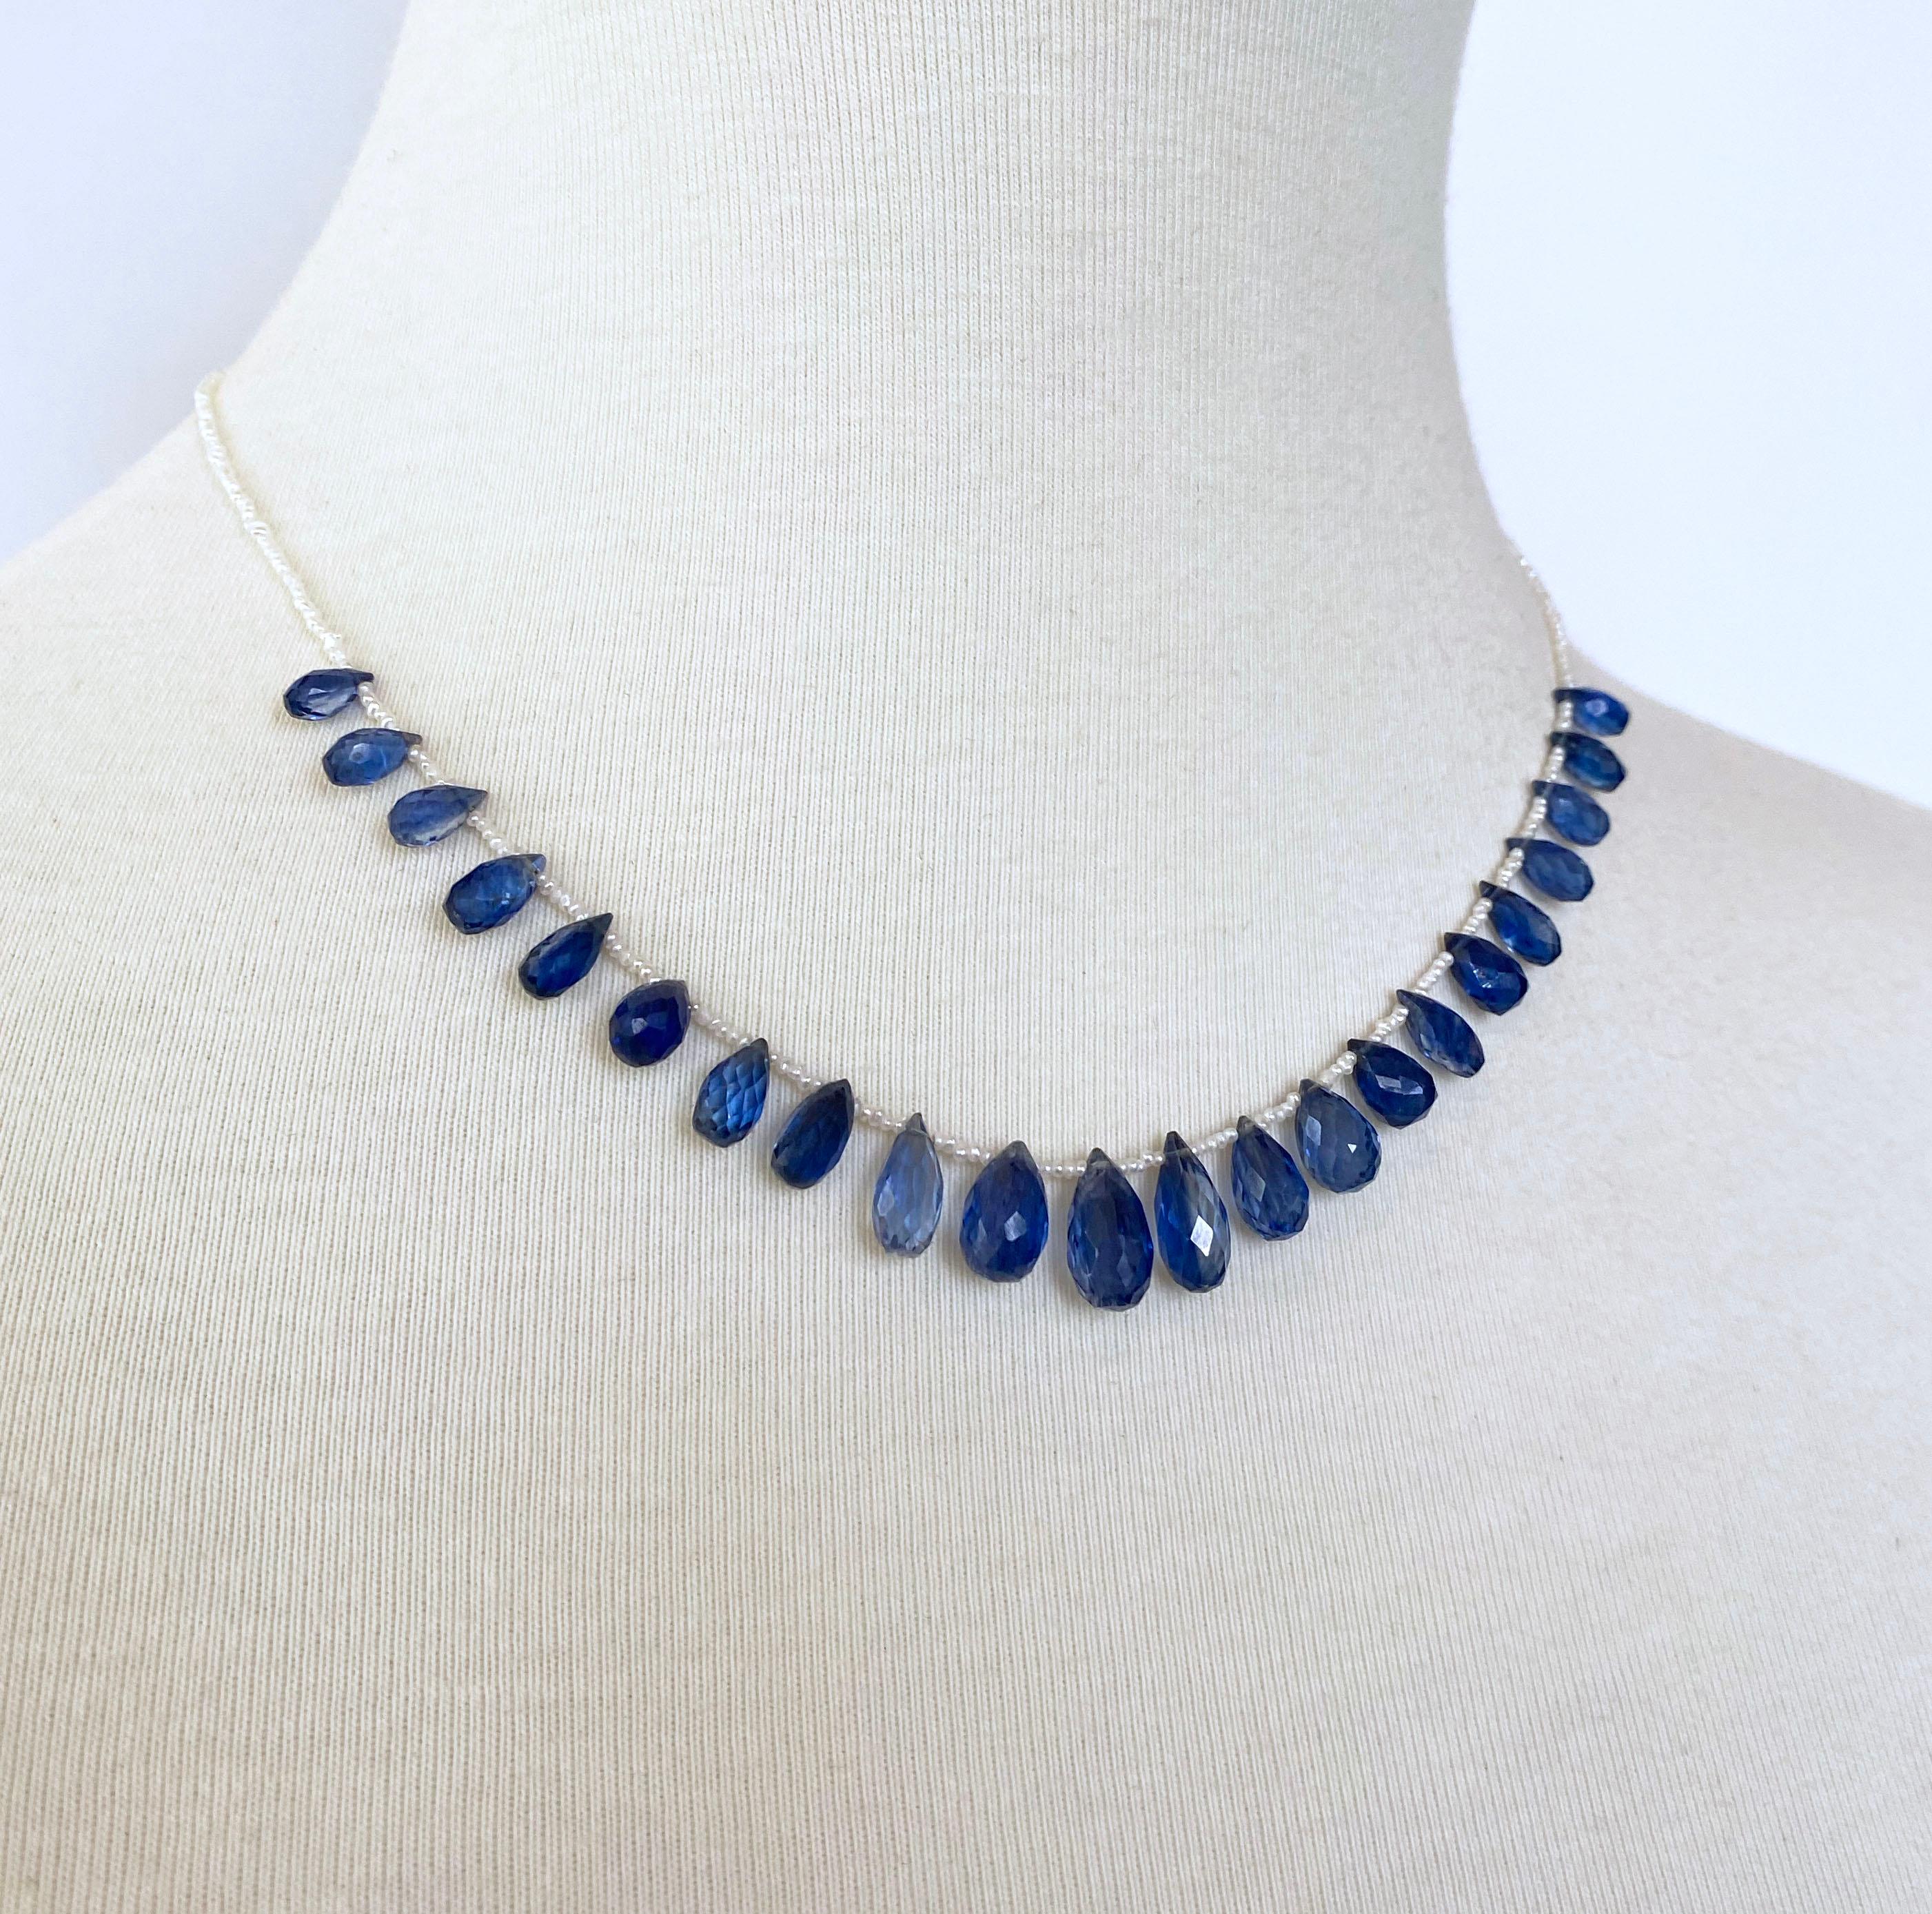 Simple yet classy necklace by Marina J. This piece features Natural Seed Pearls all beautifully adorned by multi faceted bright blue Kyanite Briolettes. These briolettes illuminate and radiate amazing hues of Blues when hit with light due to their